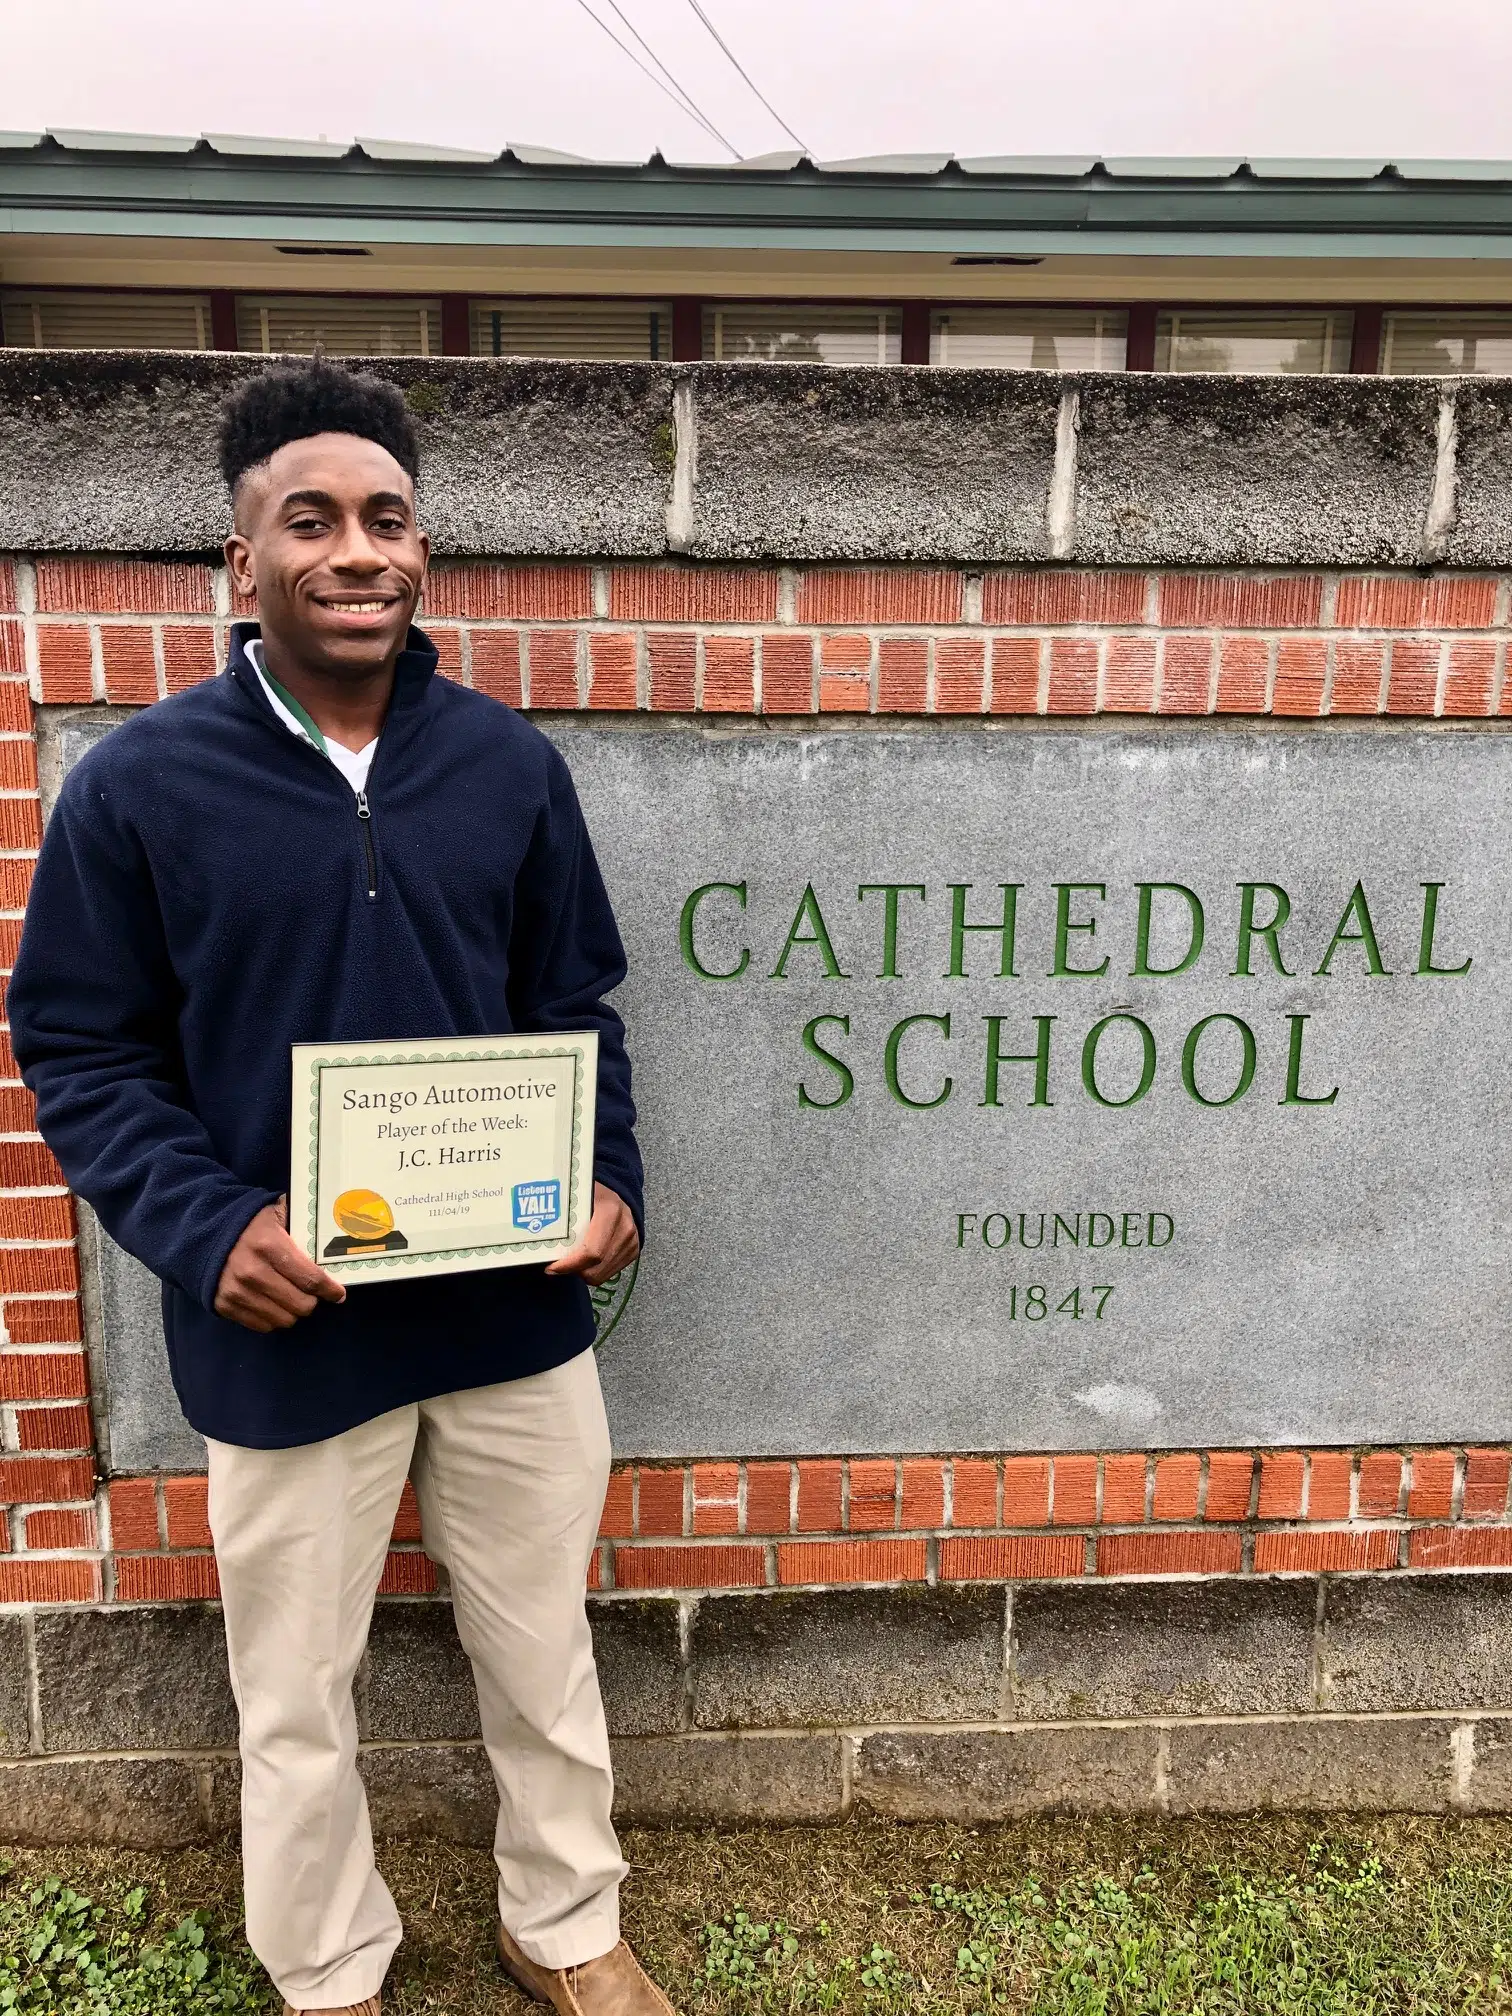 J.C. Harris of Cathedral High School Sango Player of the Week 11.4.19